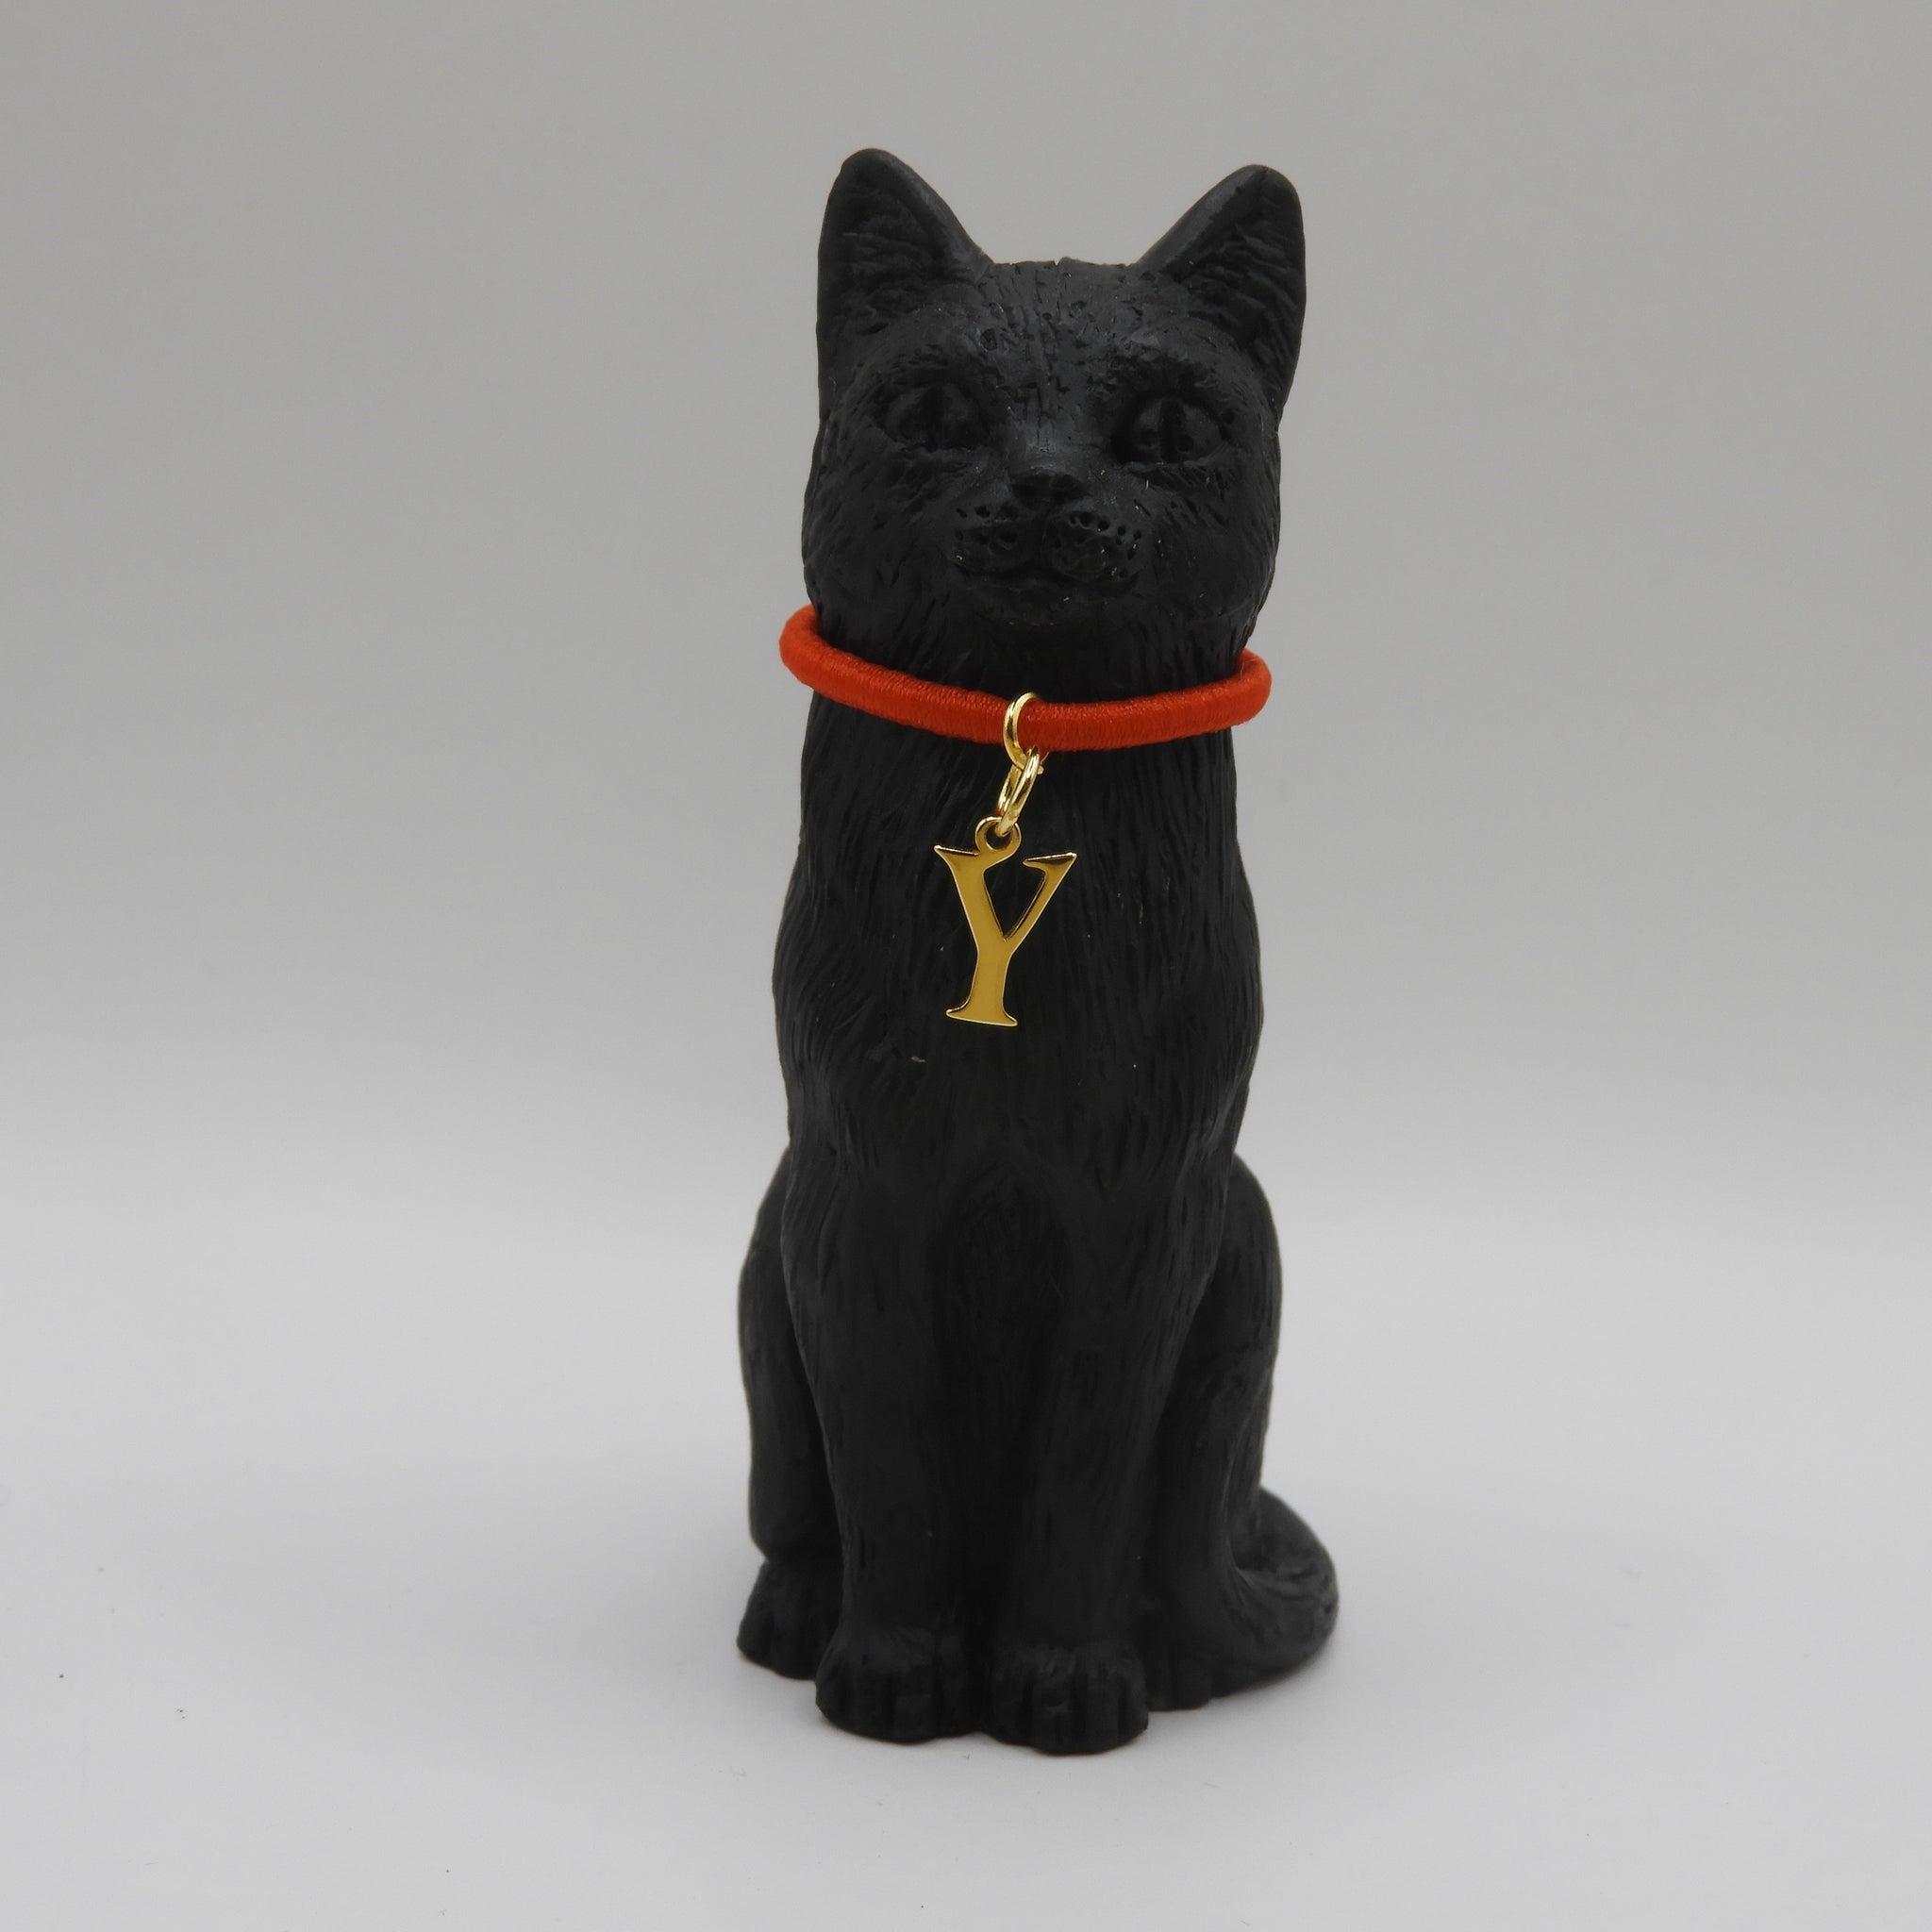 8cm Original Lucky Cat with Initial Y Charm